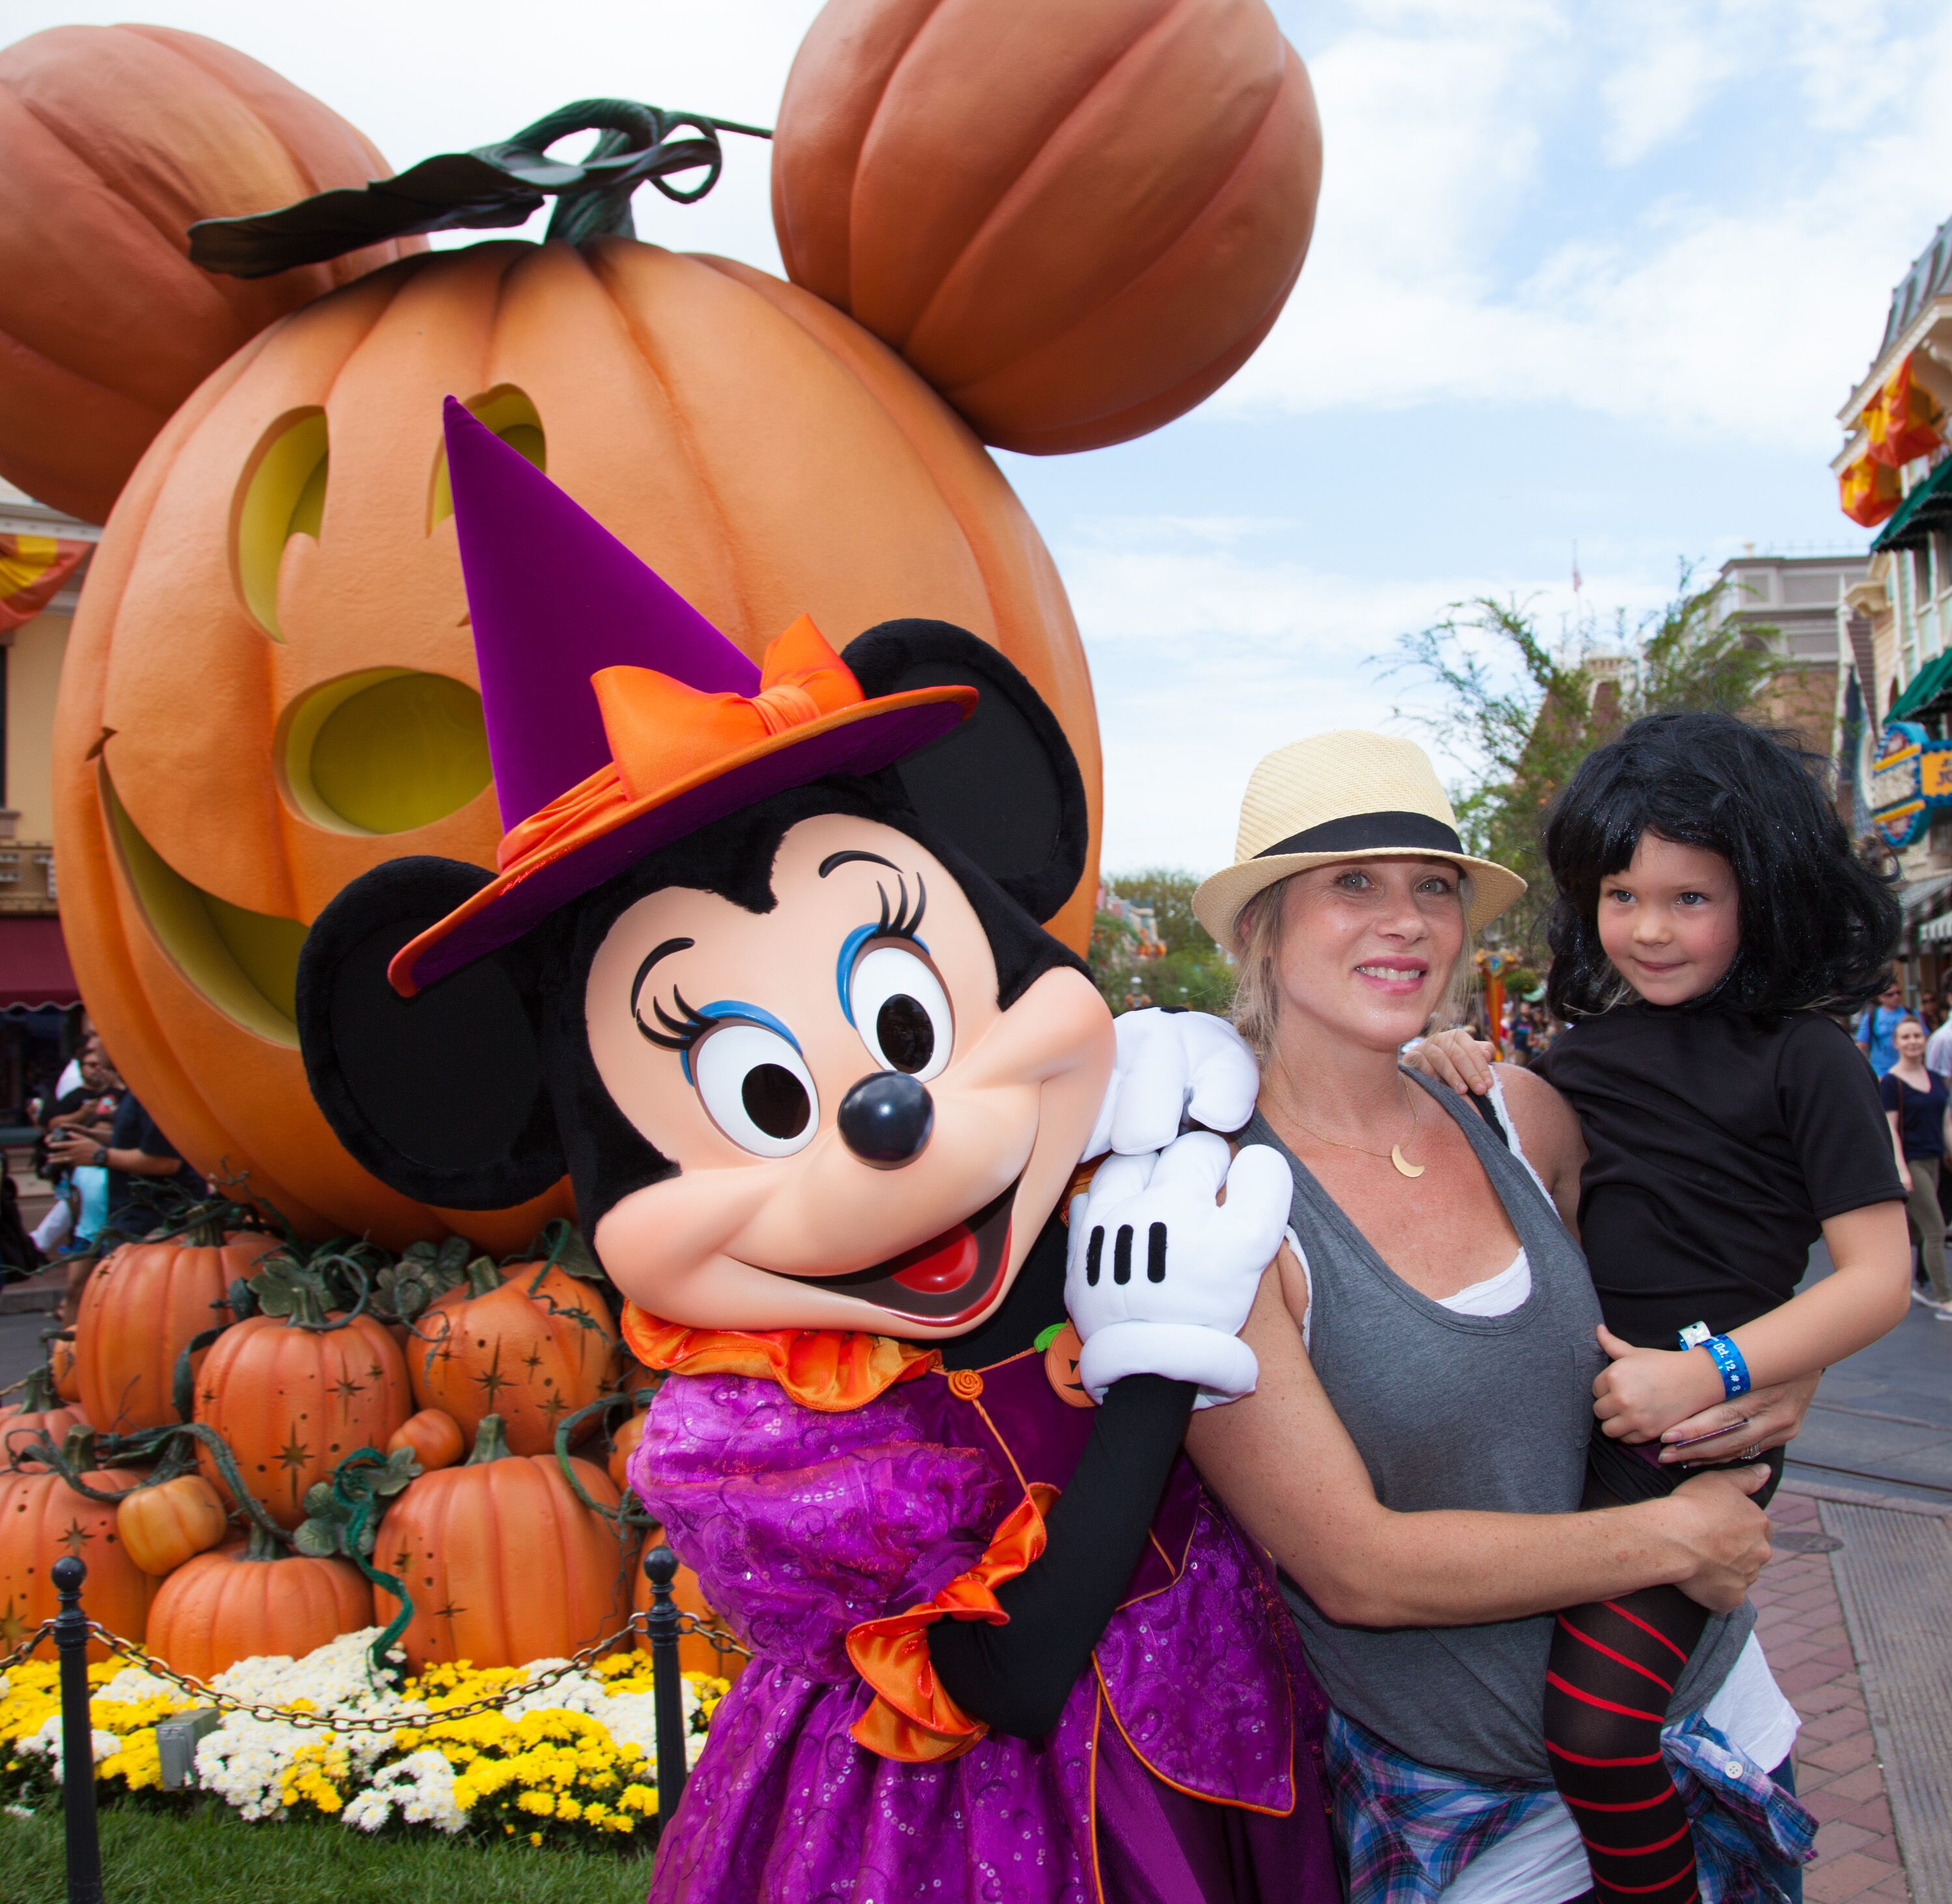  Christina Applegate and daughter Sadie LeNoble celebrate "Halloween Time" with Minnie Mouse in 2015 | Source: Getty Images